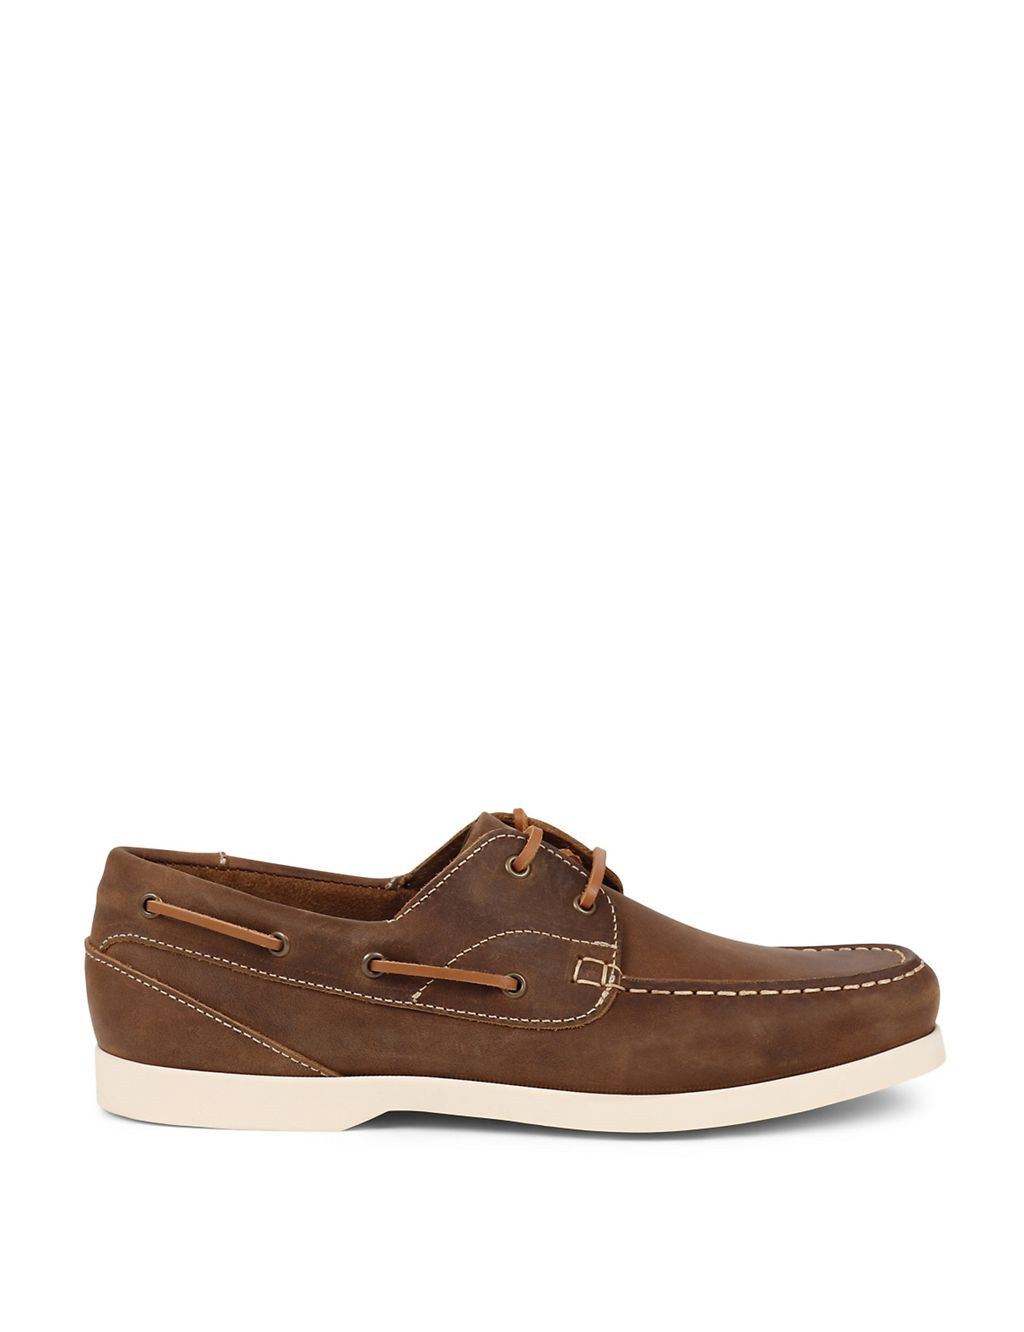 Leather Boat Shoes 1 of 7